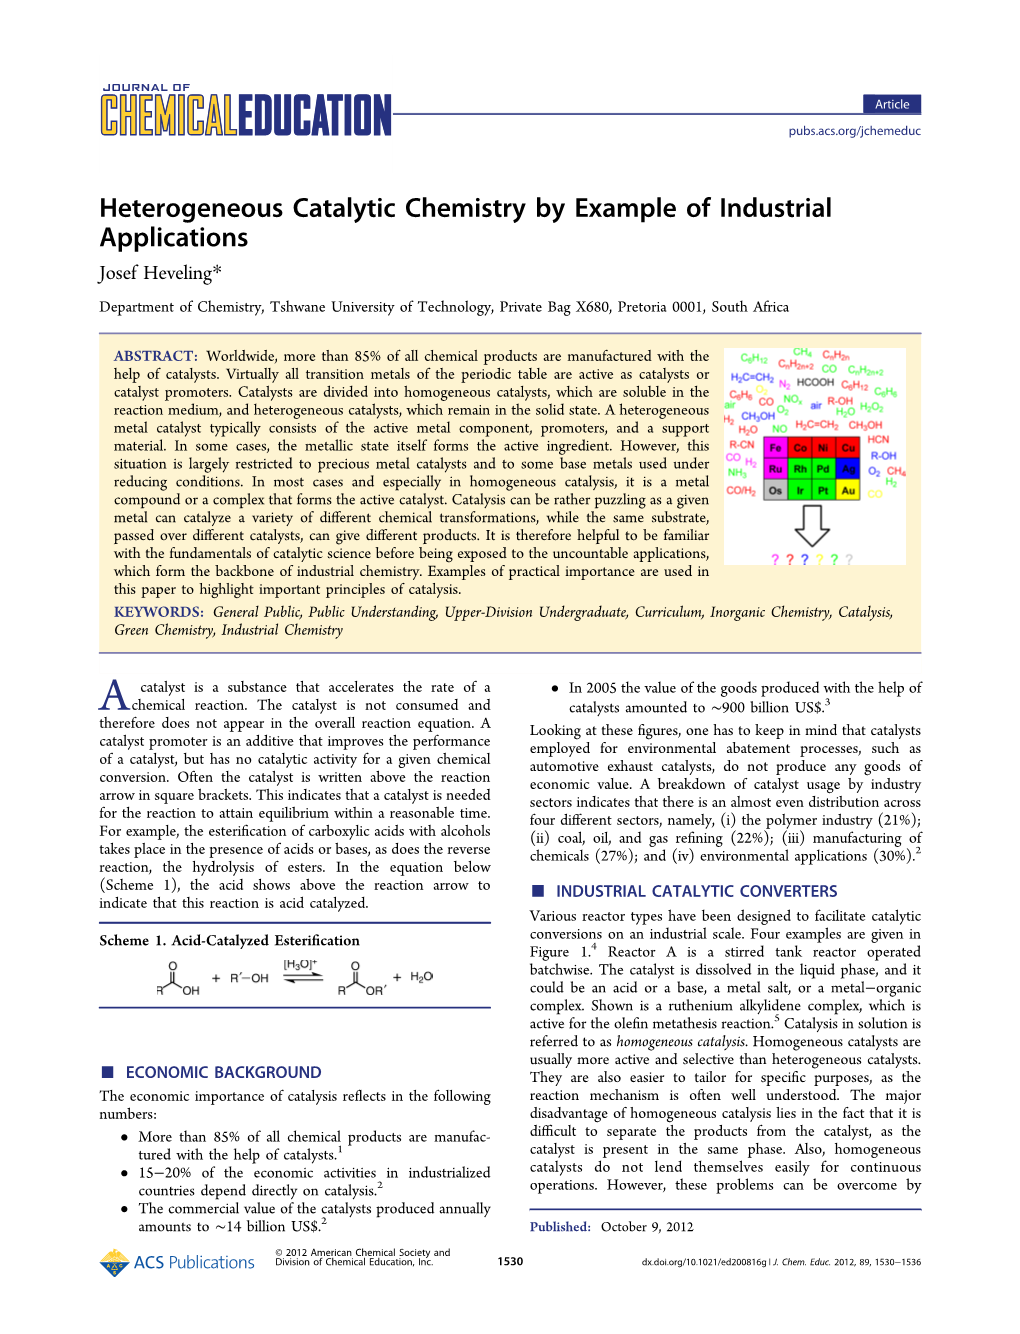 Heterogeneous Catalytic Chemistry by Example of Industrial Applications